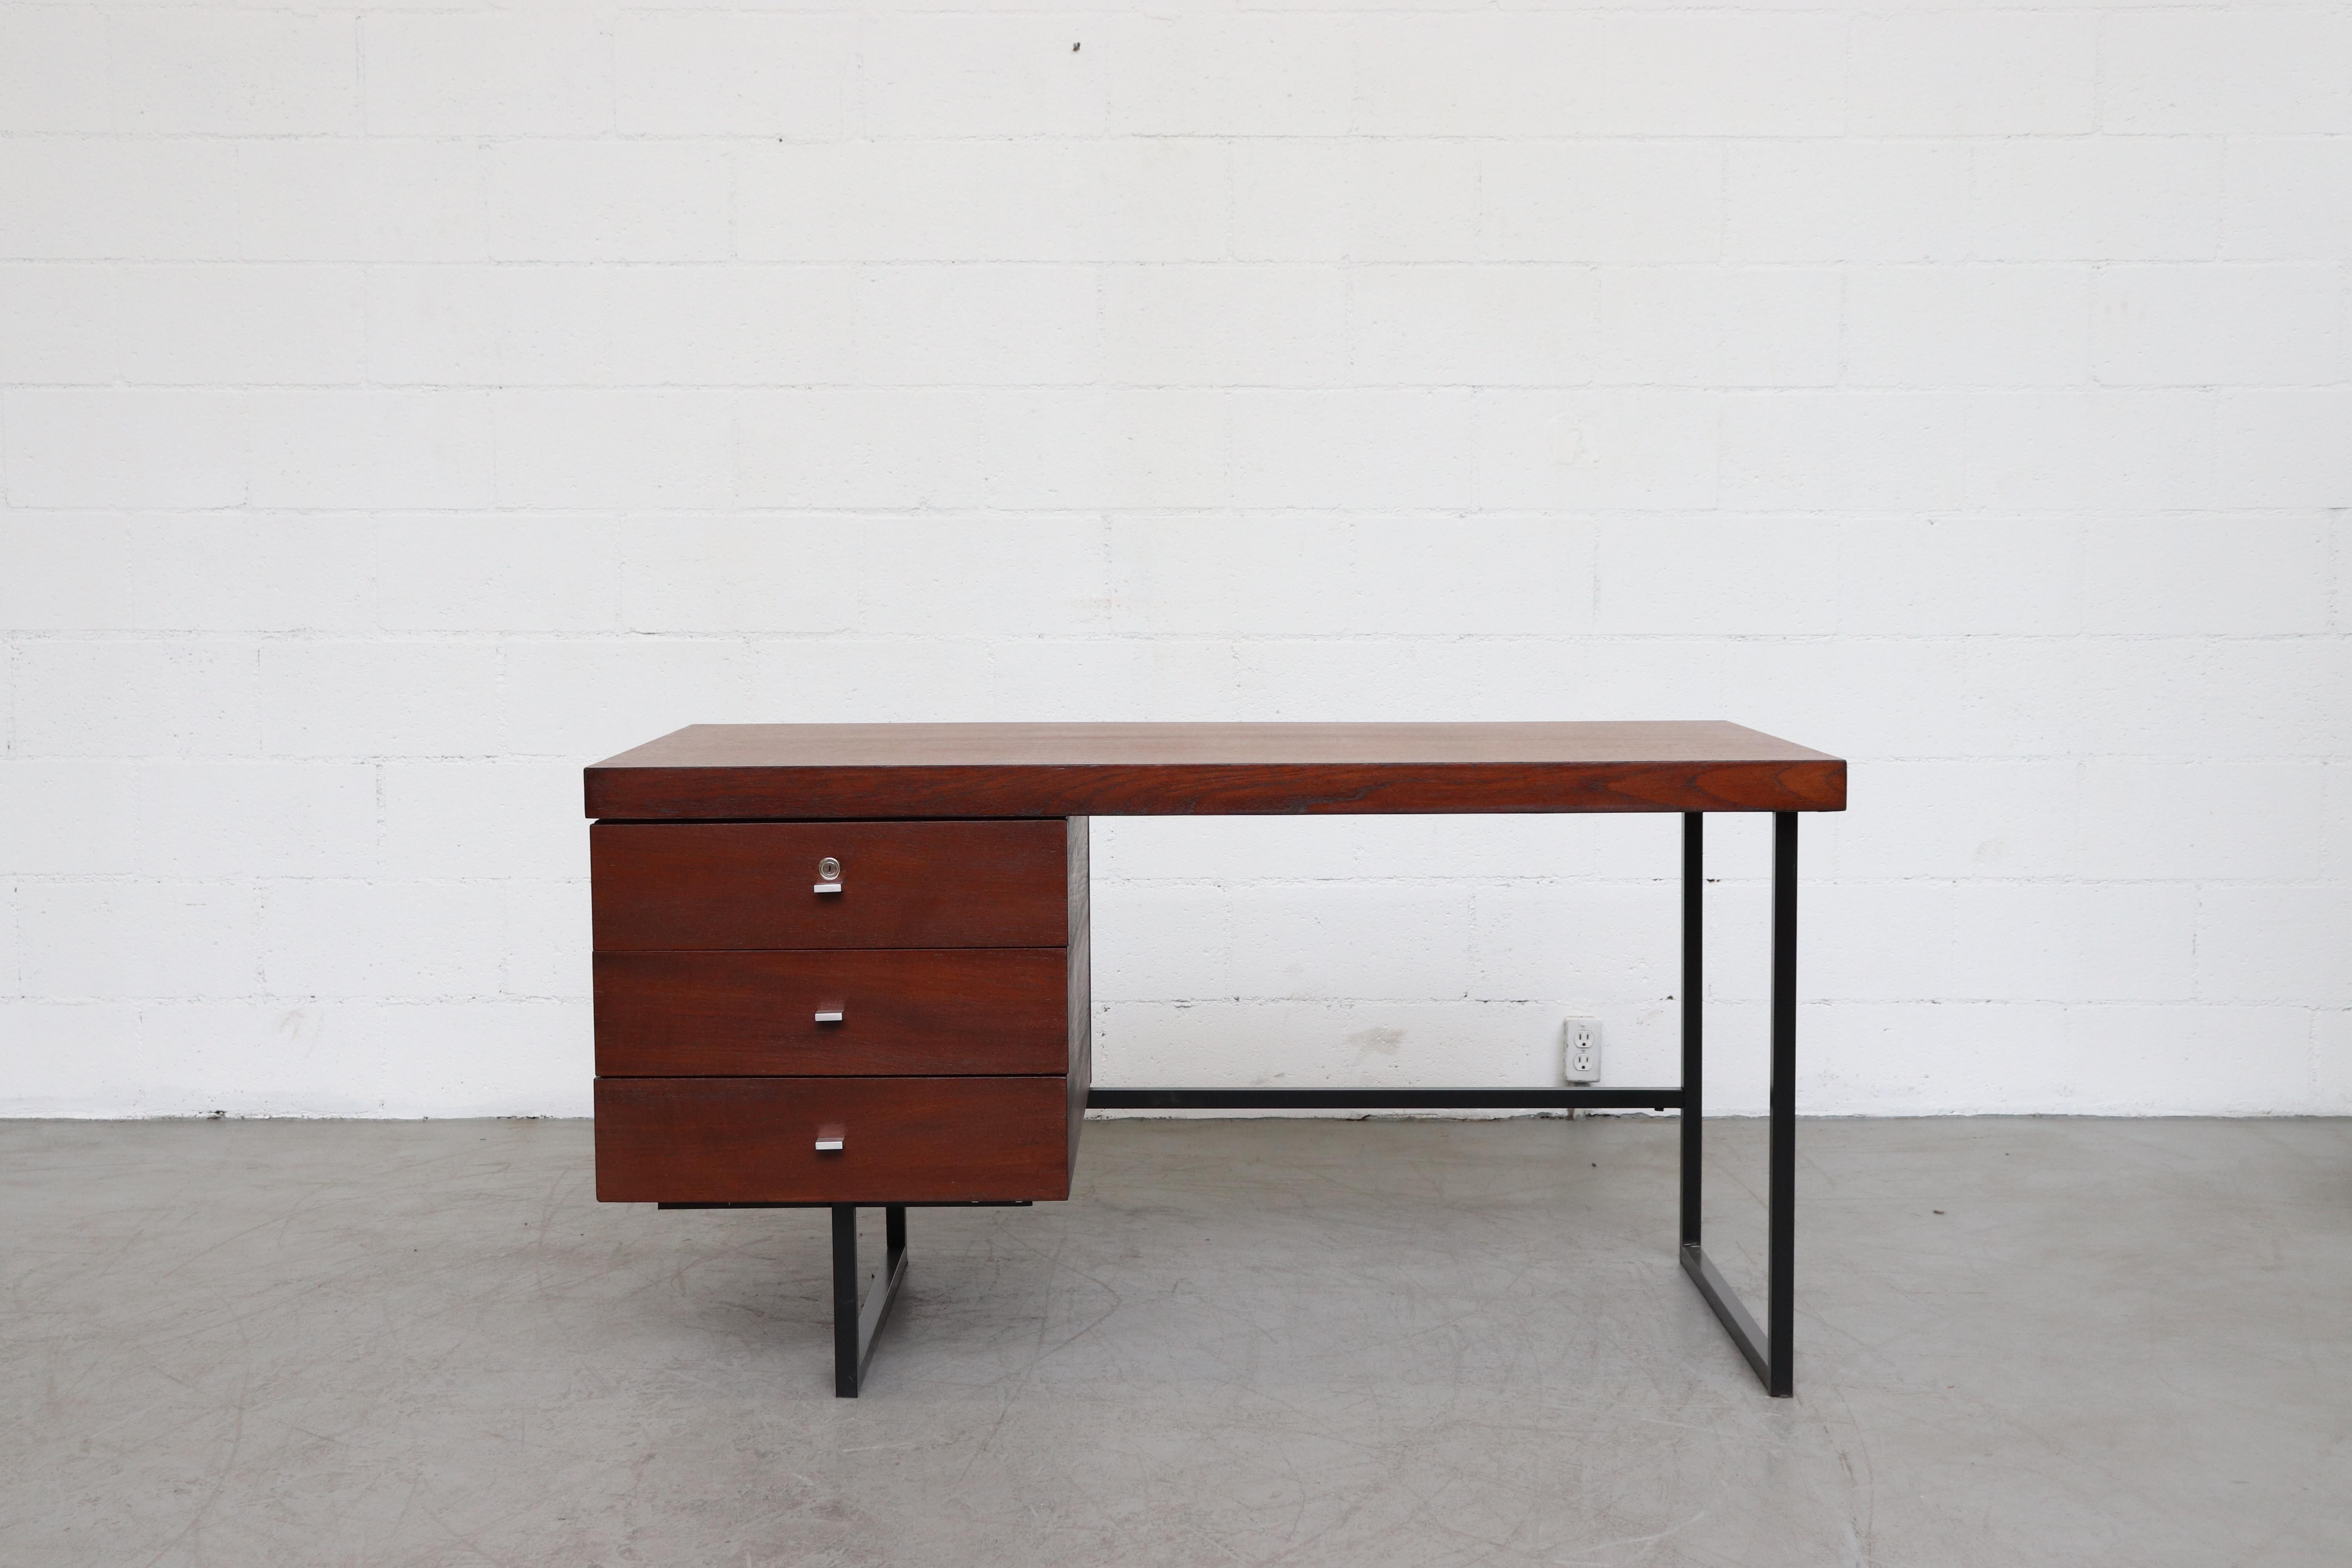 Pierre Guariche dark teak writing desk. Three stacked drawers and black enameled metal base frame. In original condition with visible signs of visual wear consistent with age and use. No key available.